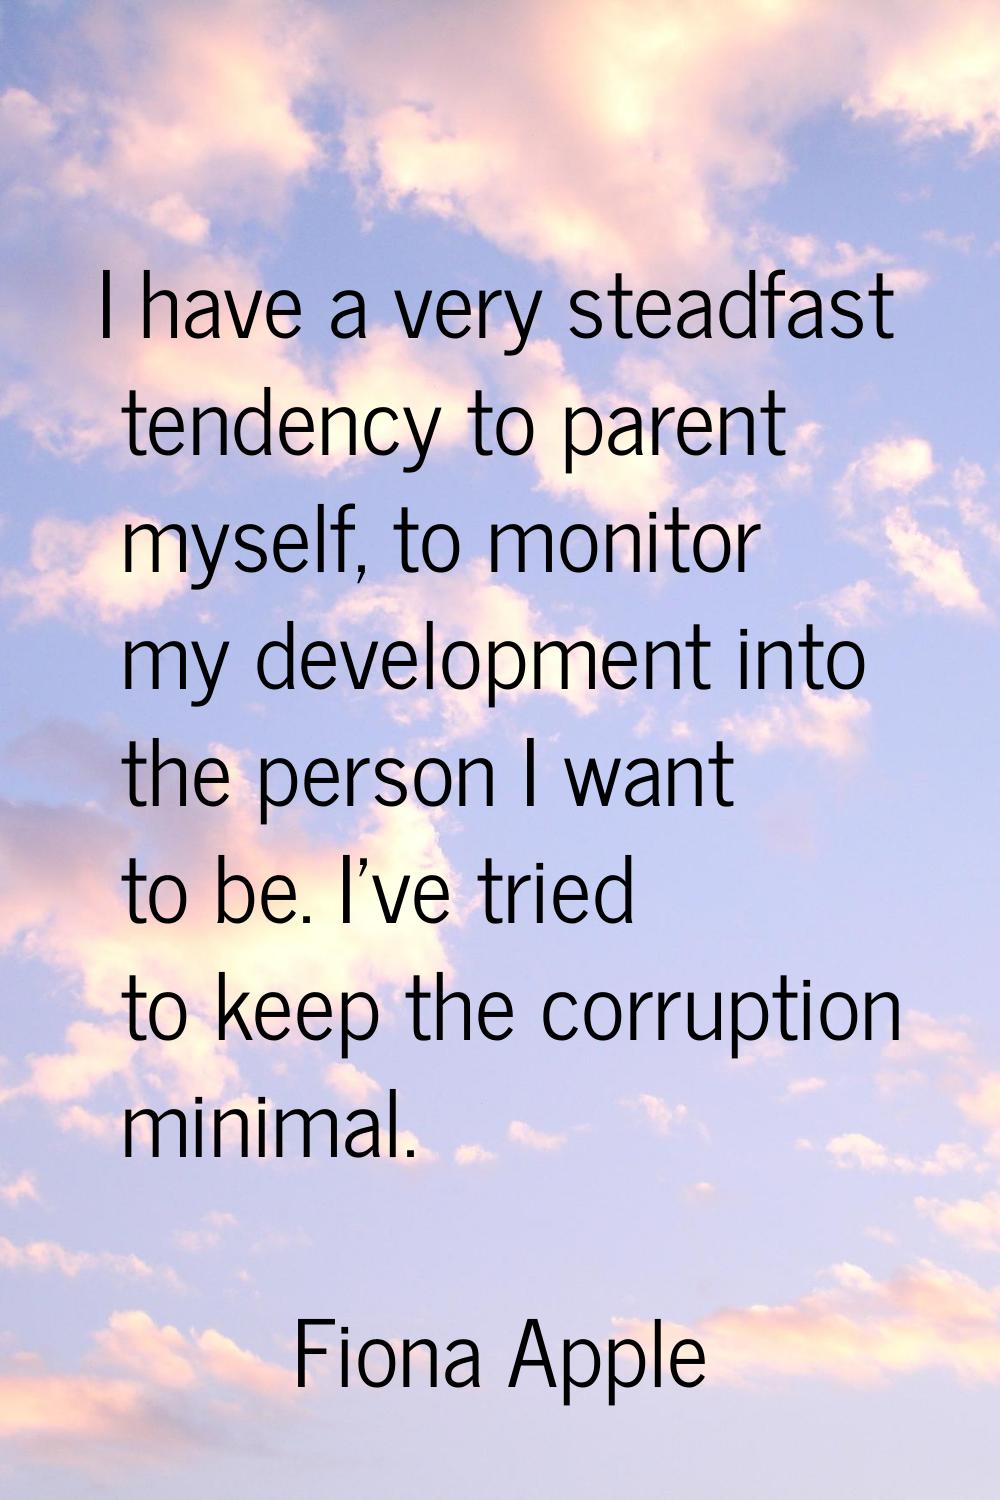 I have a very steadfast tendency to parent myself, to monitor my development into the person I want